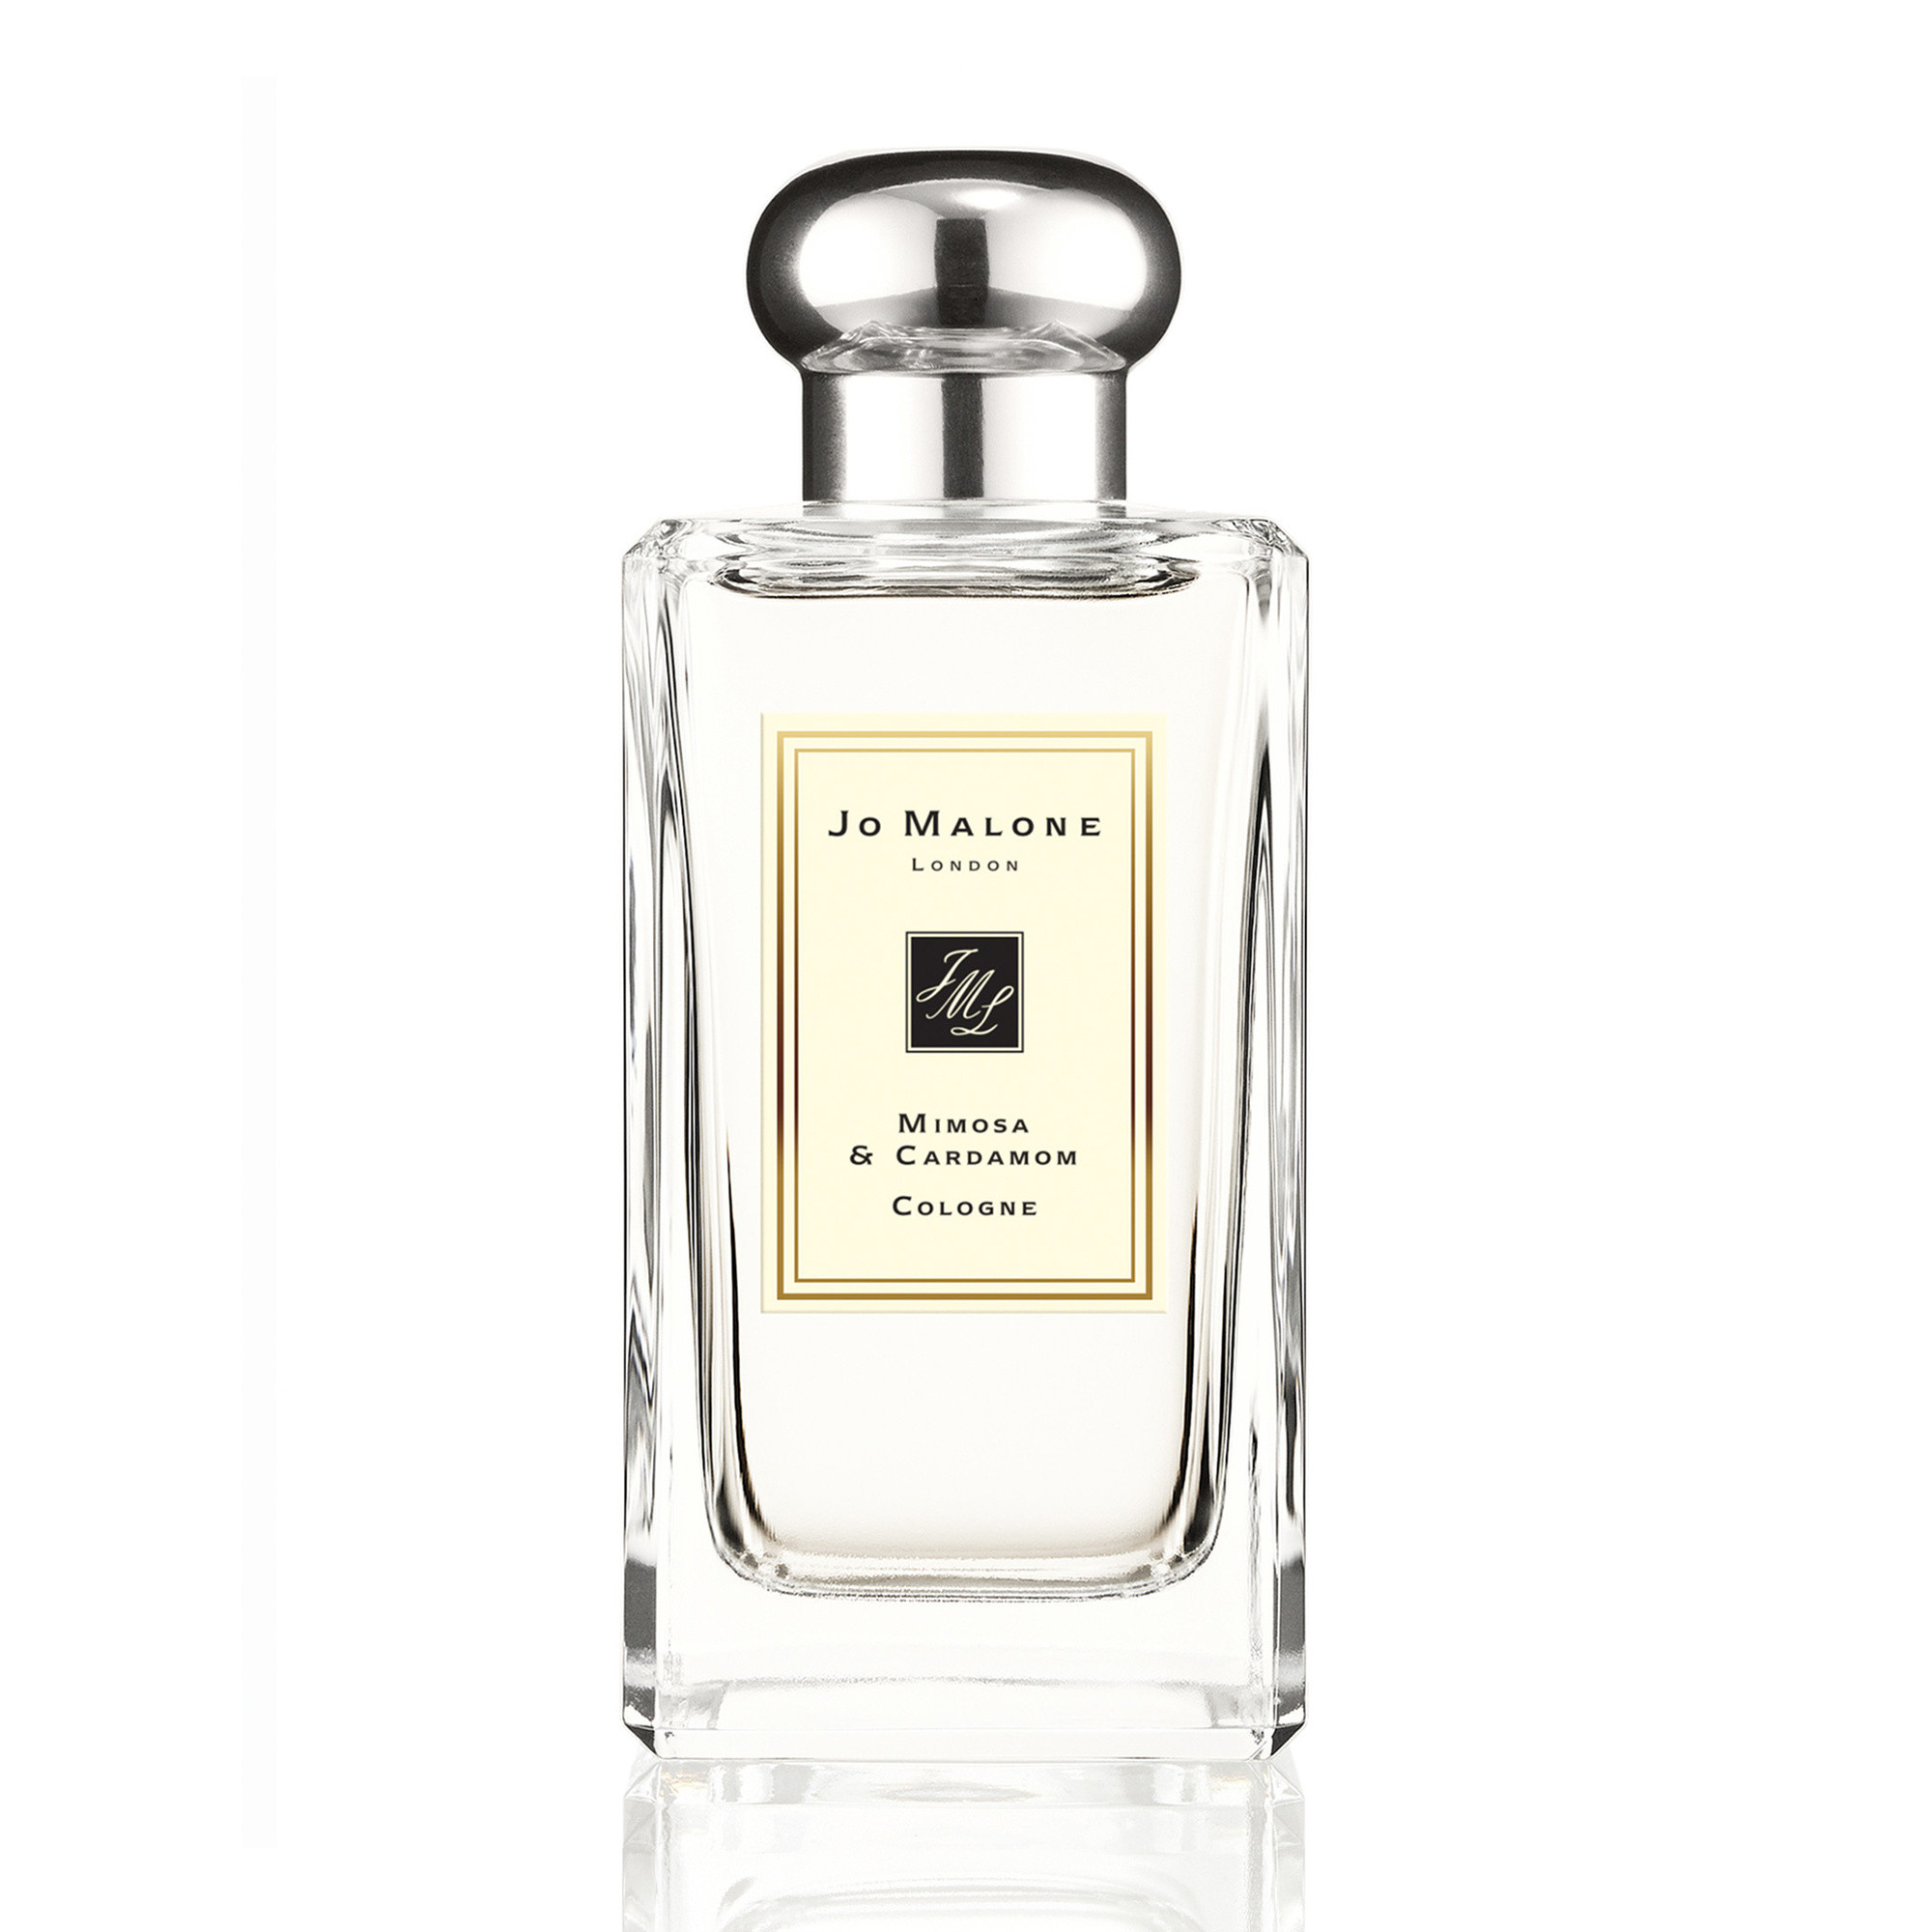 Jo Malone London mimosa & cardamom cologne 100 ml, Beige, large image number 0